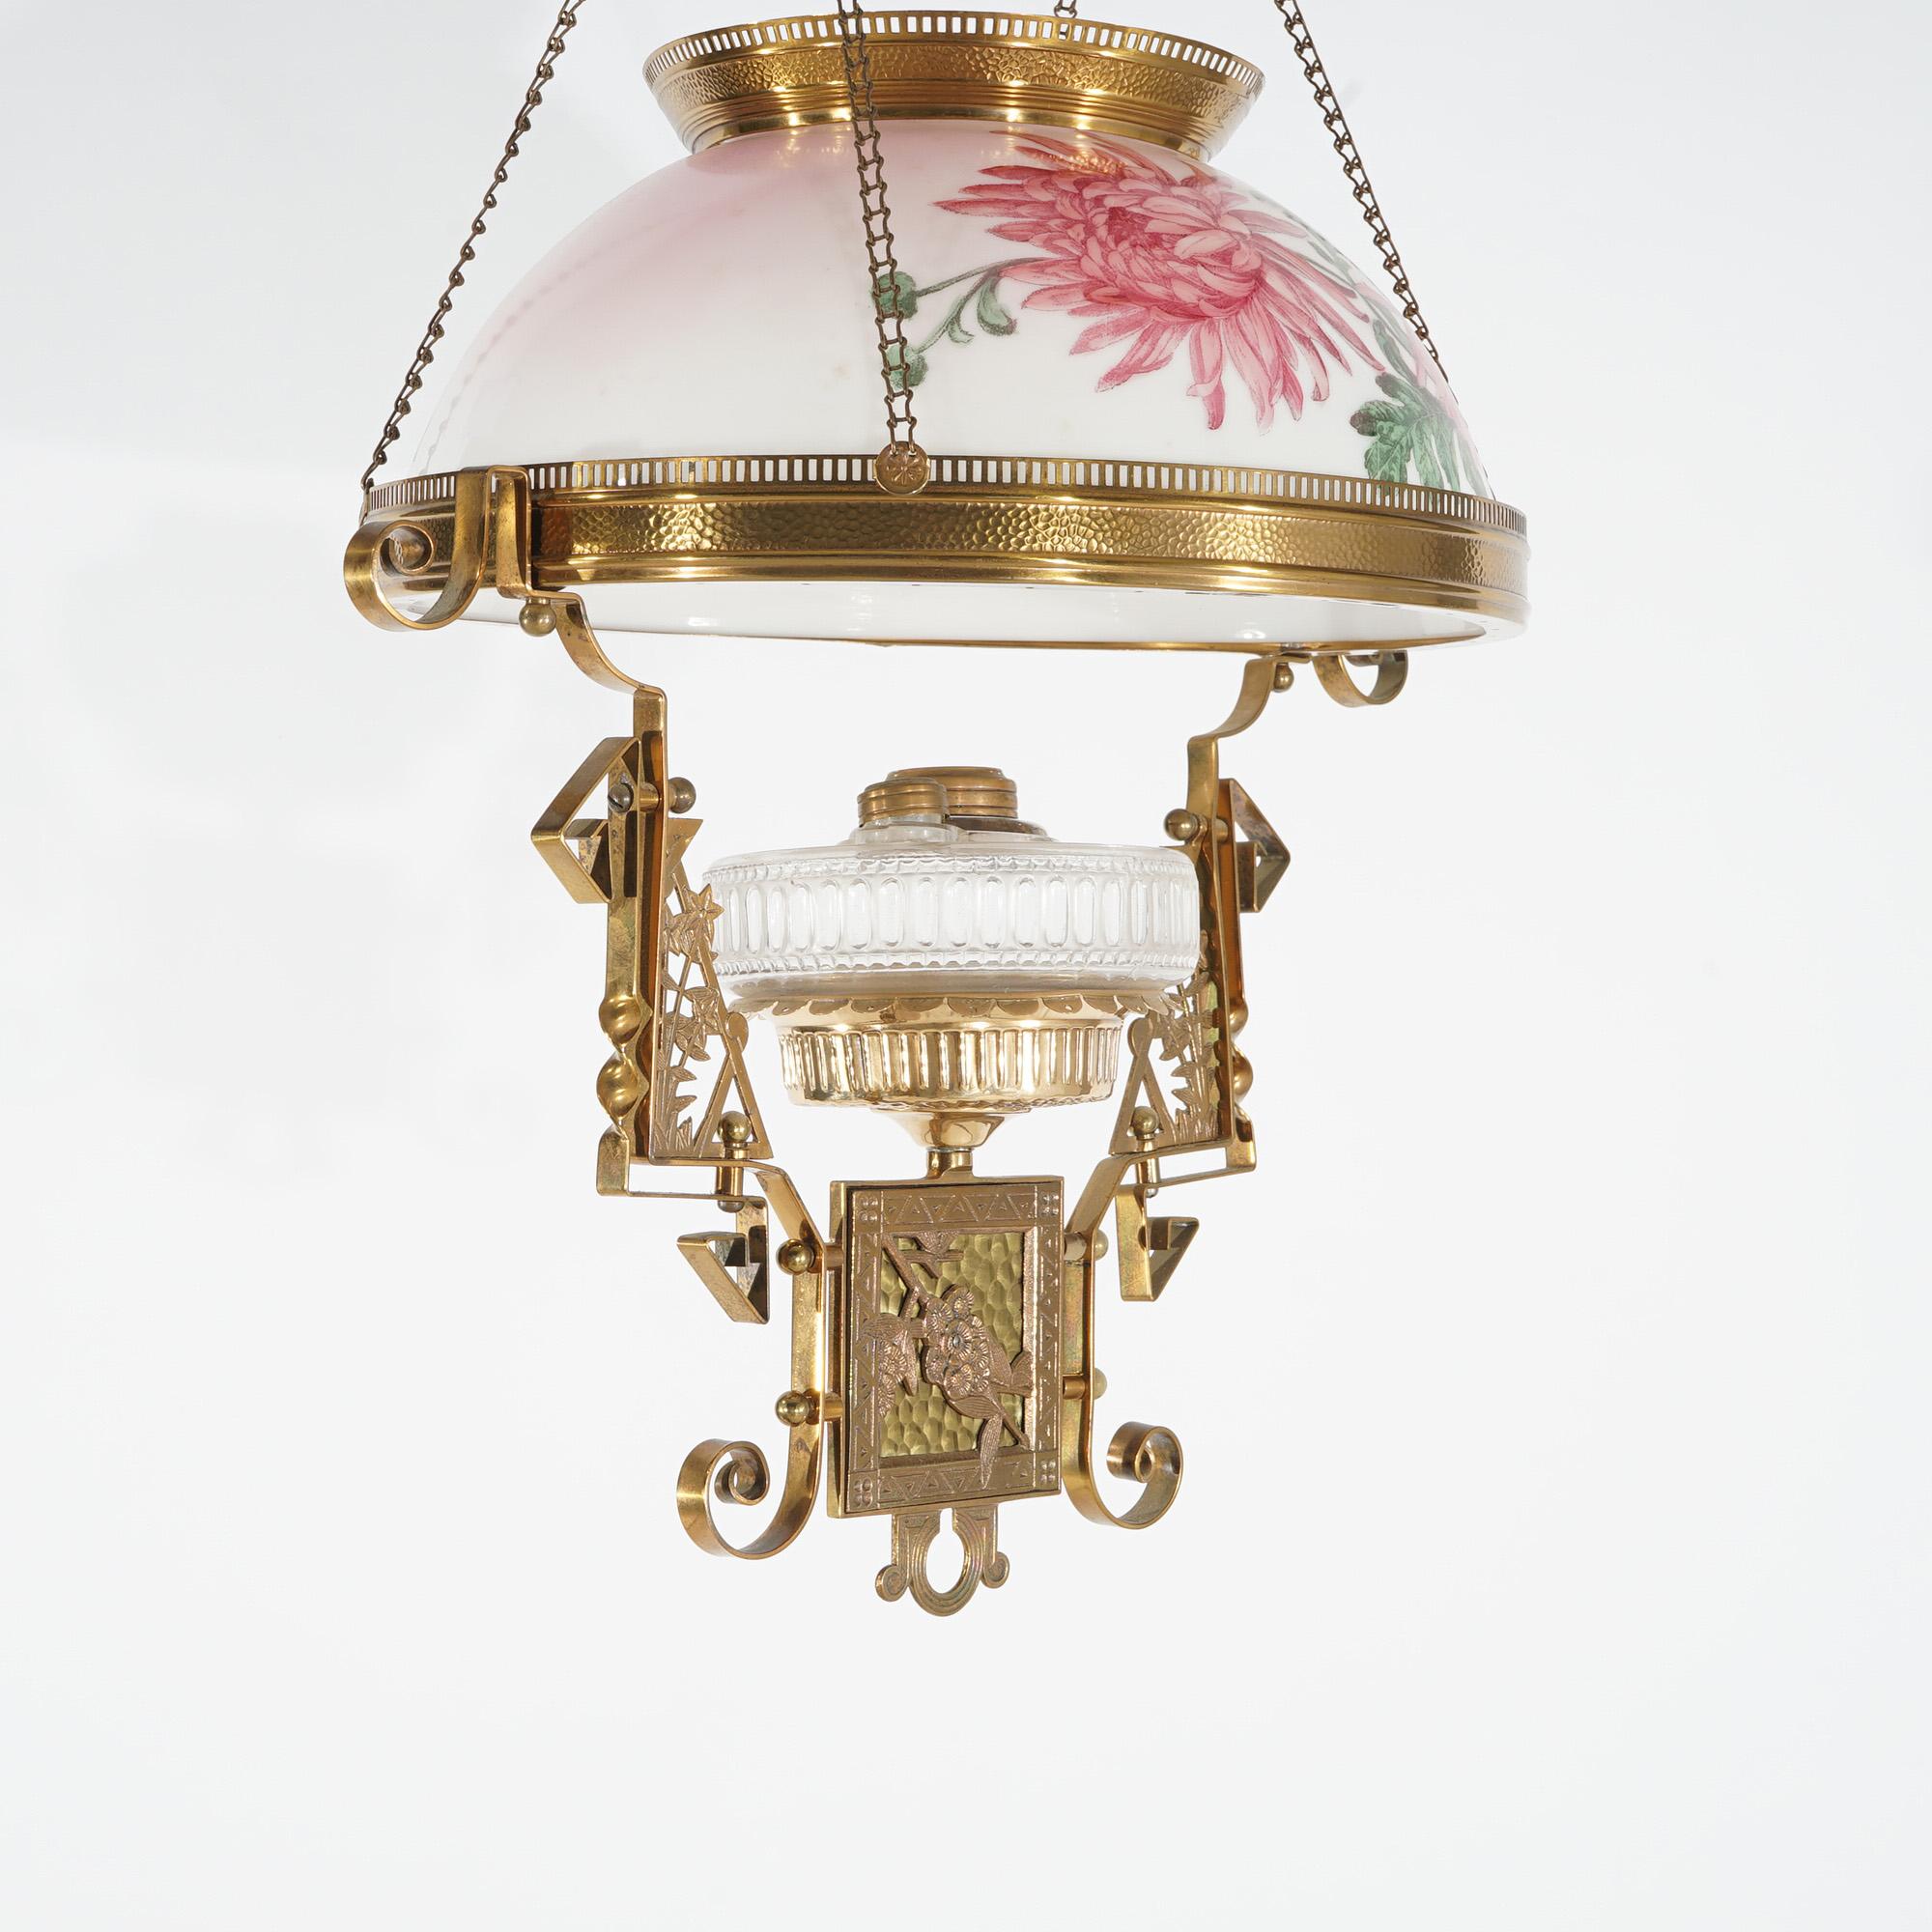 Hand-Painted Antique Aesthetic Movement Hand Painted Hanging Kerosene Lamp C1890 For Sale